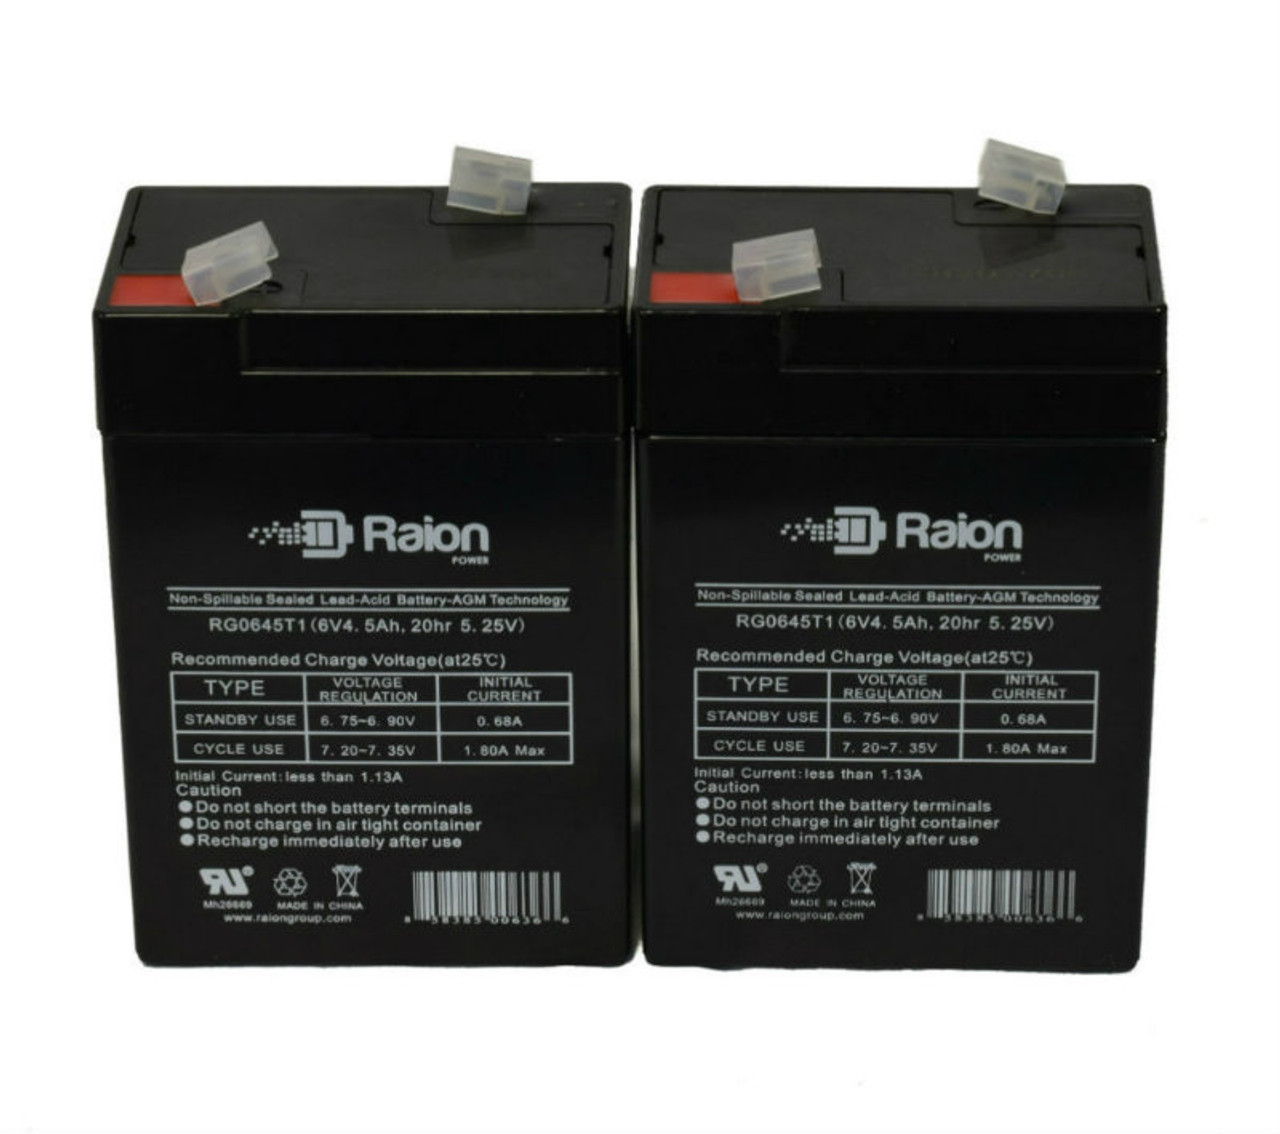 Raion Power 6V 4.5Ah Replacement Emergency Light Battery for Sure-Lites 3901 - 2 Pack